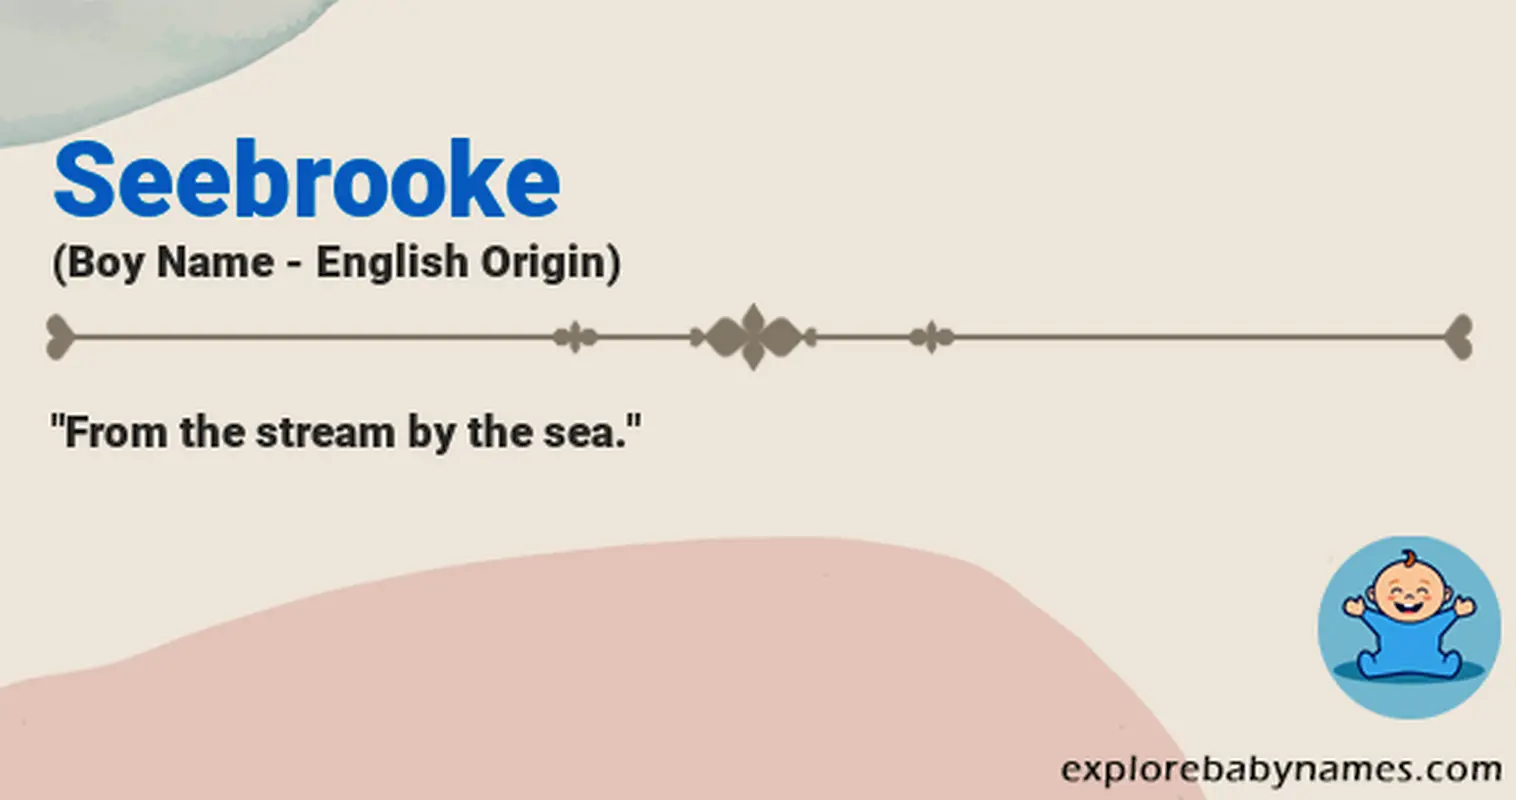 Meaning of Seebrooke